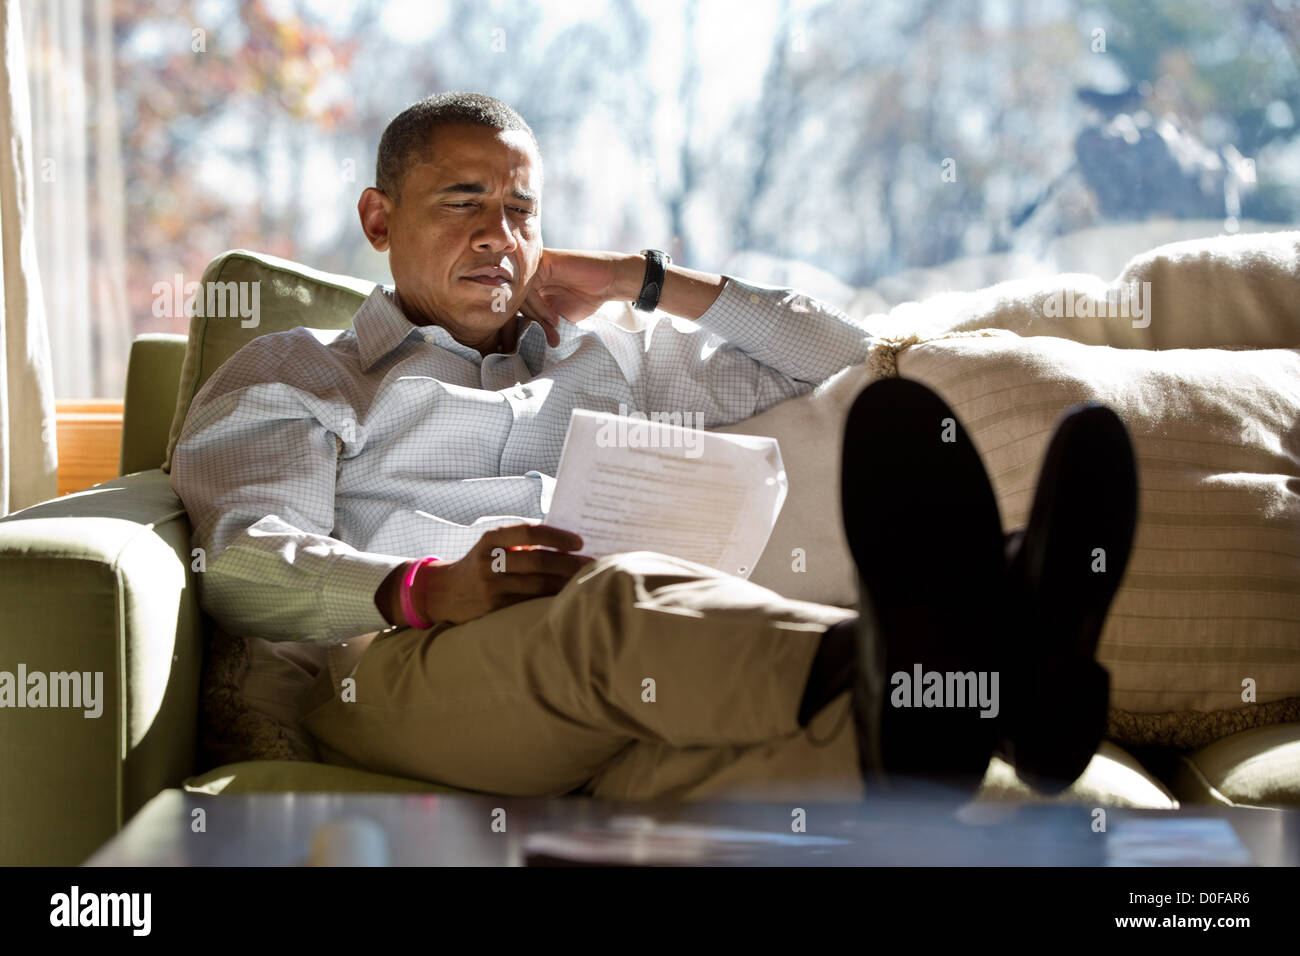 US President Barack Obama reads briefing material while meeting with advisors October 21, 2012 inside his cabin at Camp David. Stock Photo